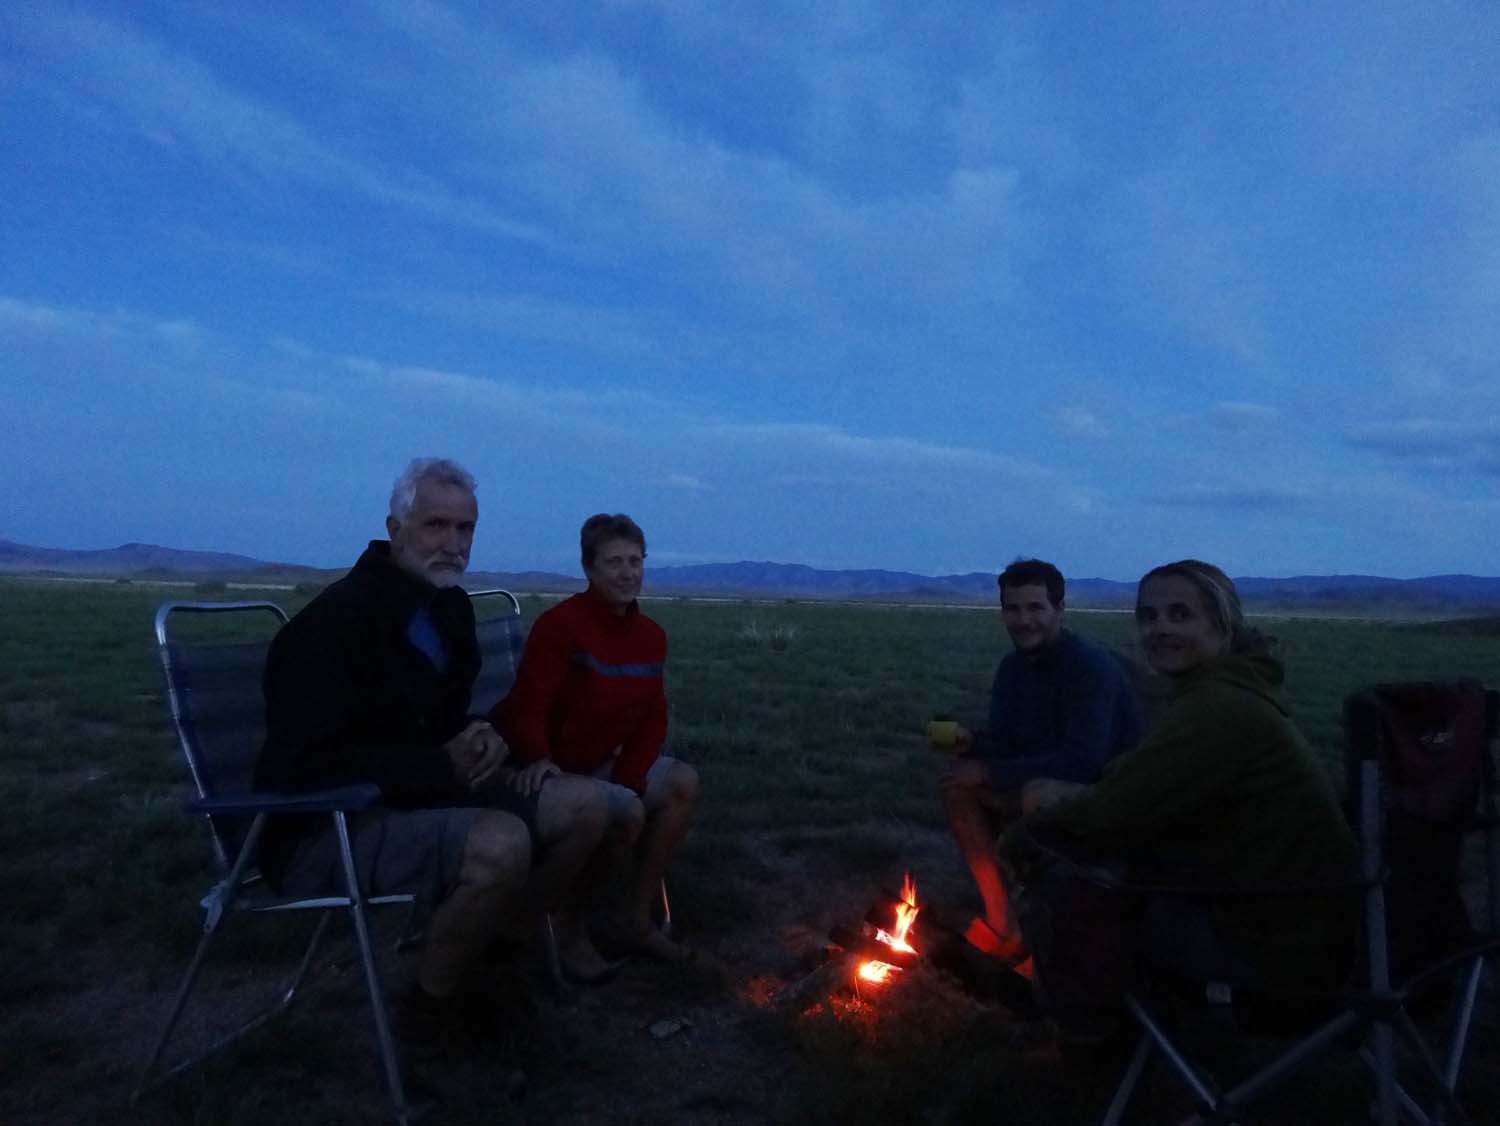 we catch up with Guy, Cheryl, Miles and Marina in the middle of nowhere and enjoy stories by the camp fire